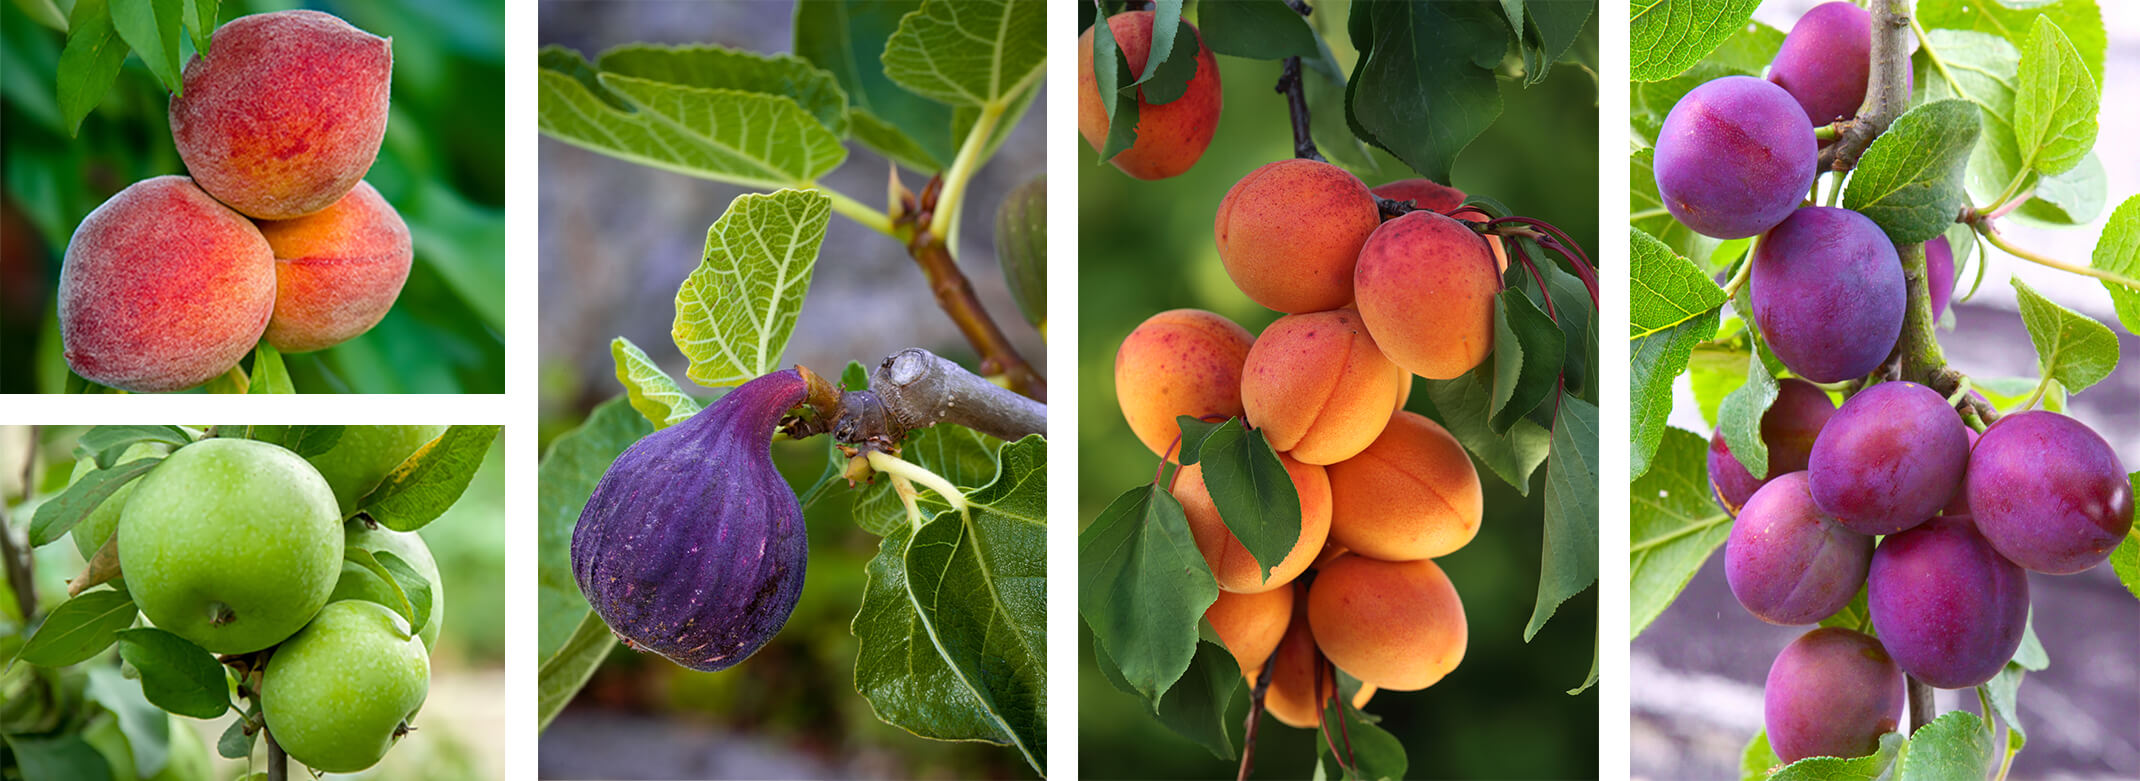 5 images of fruits growing on trees: peaches, green apples, figs, apricots, and plums